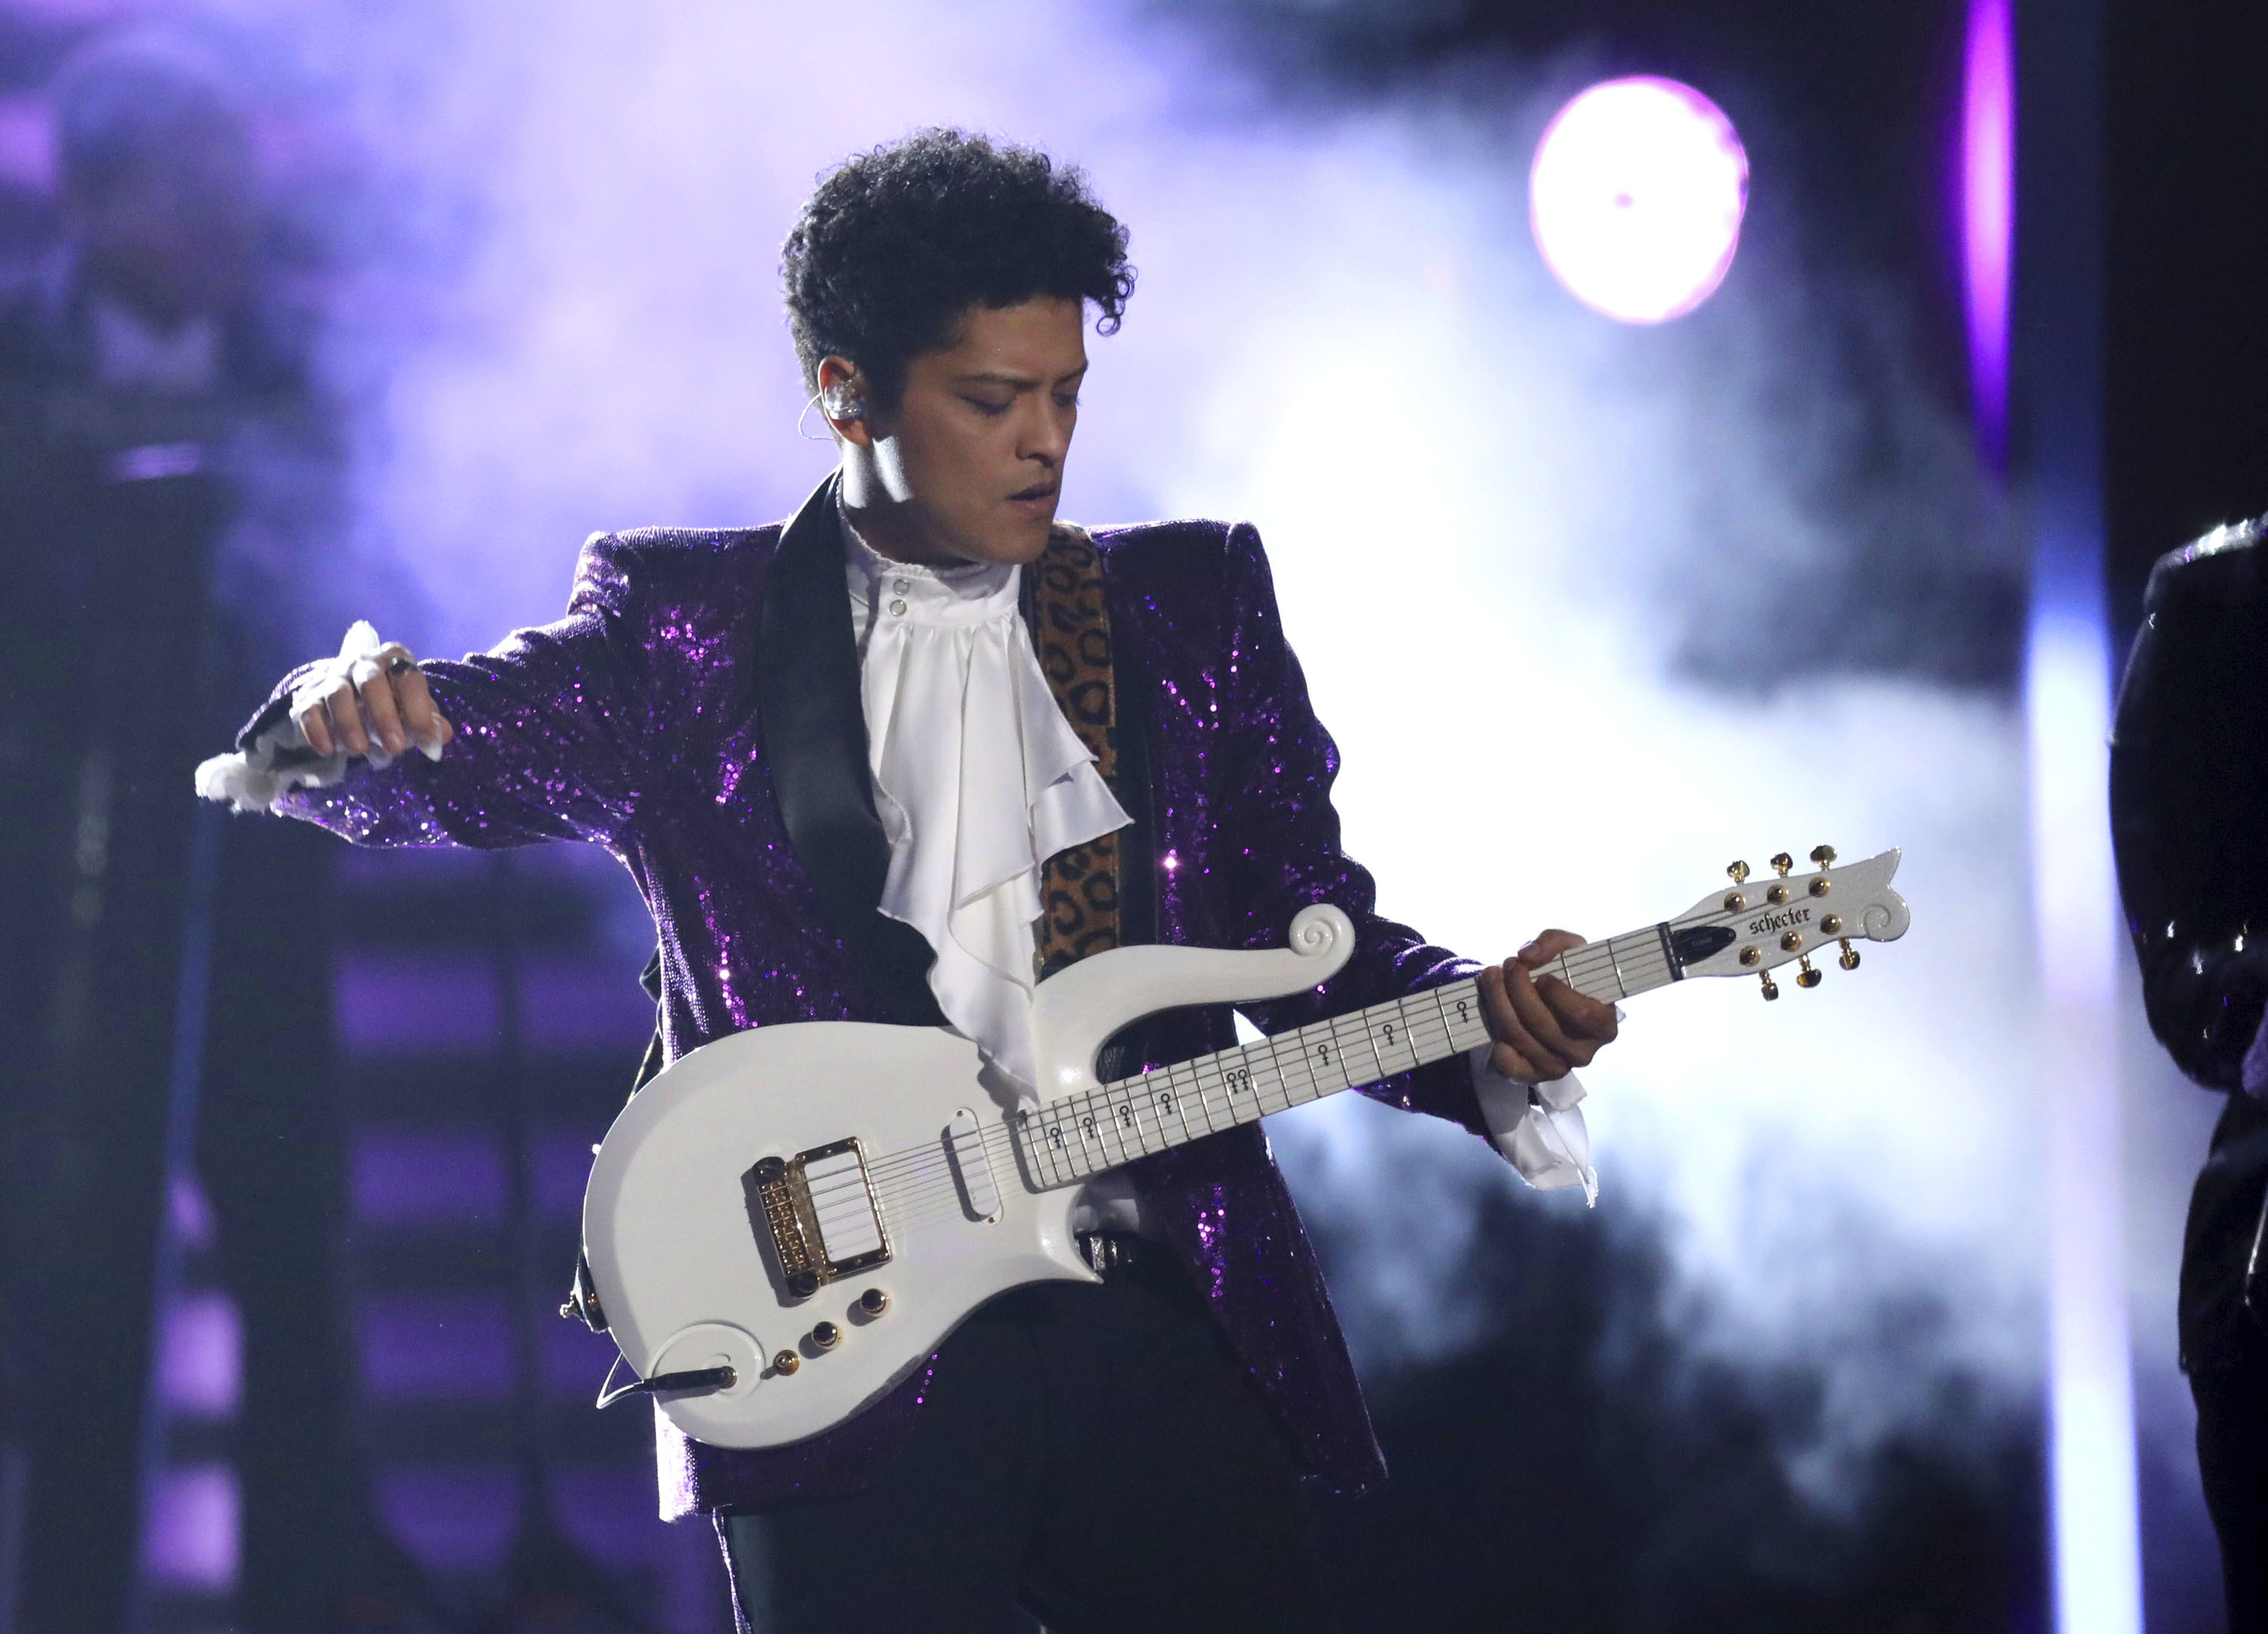 Bruno Mars performs "Let's Go Crazy" during a tribute to Prince at the 59th annual Grammy Awards in Los Angeles. (Photo by Matt Sayles/Invision/AP)